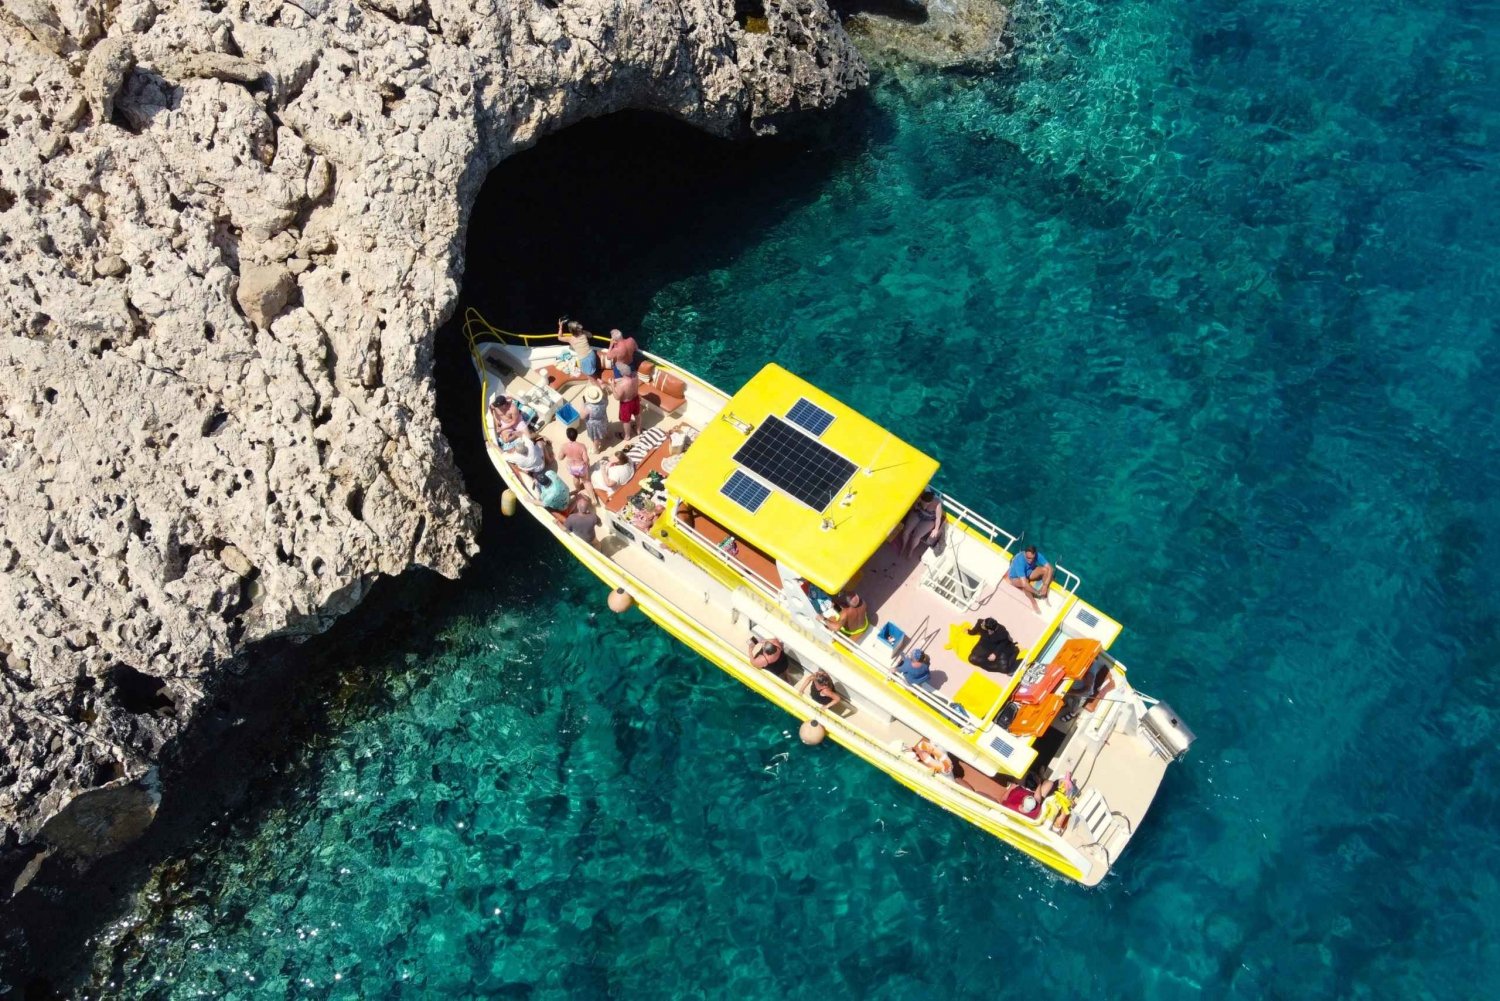 Protaras: The Lazy Day Cruise with The Yellow Boat Cruises